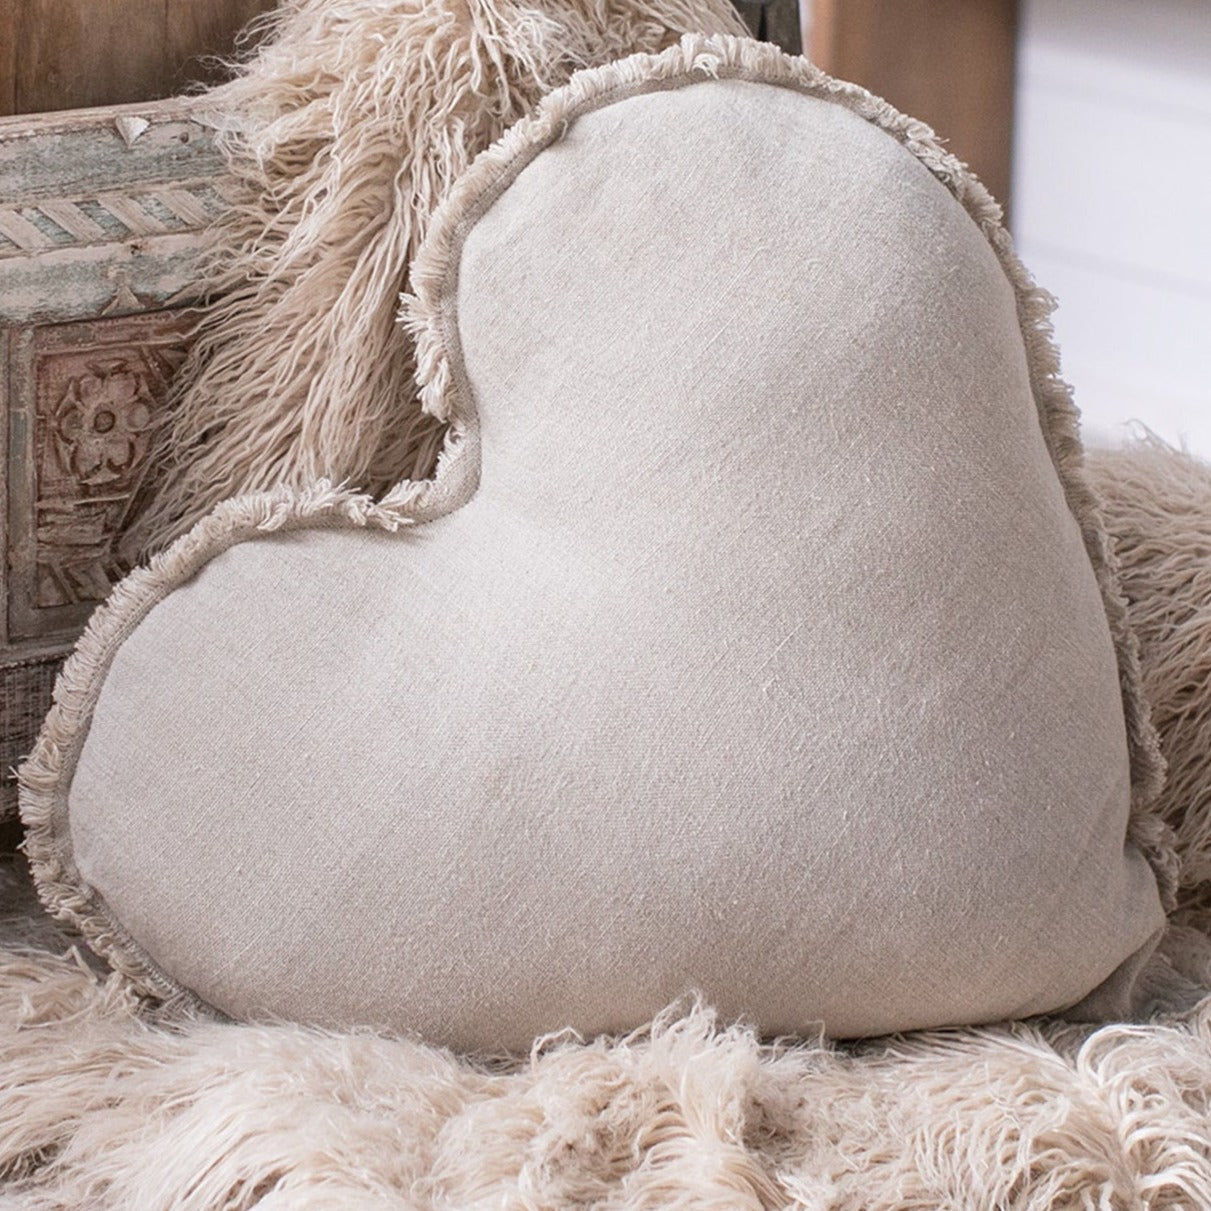 Sugarboo Designs Heart Shaped Pillow